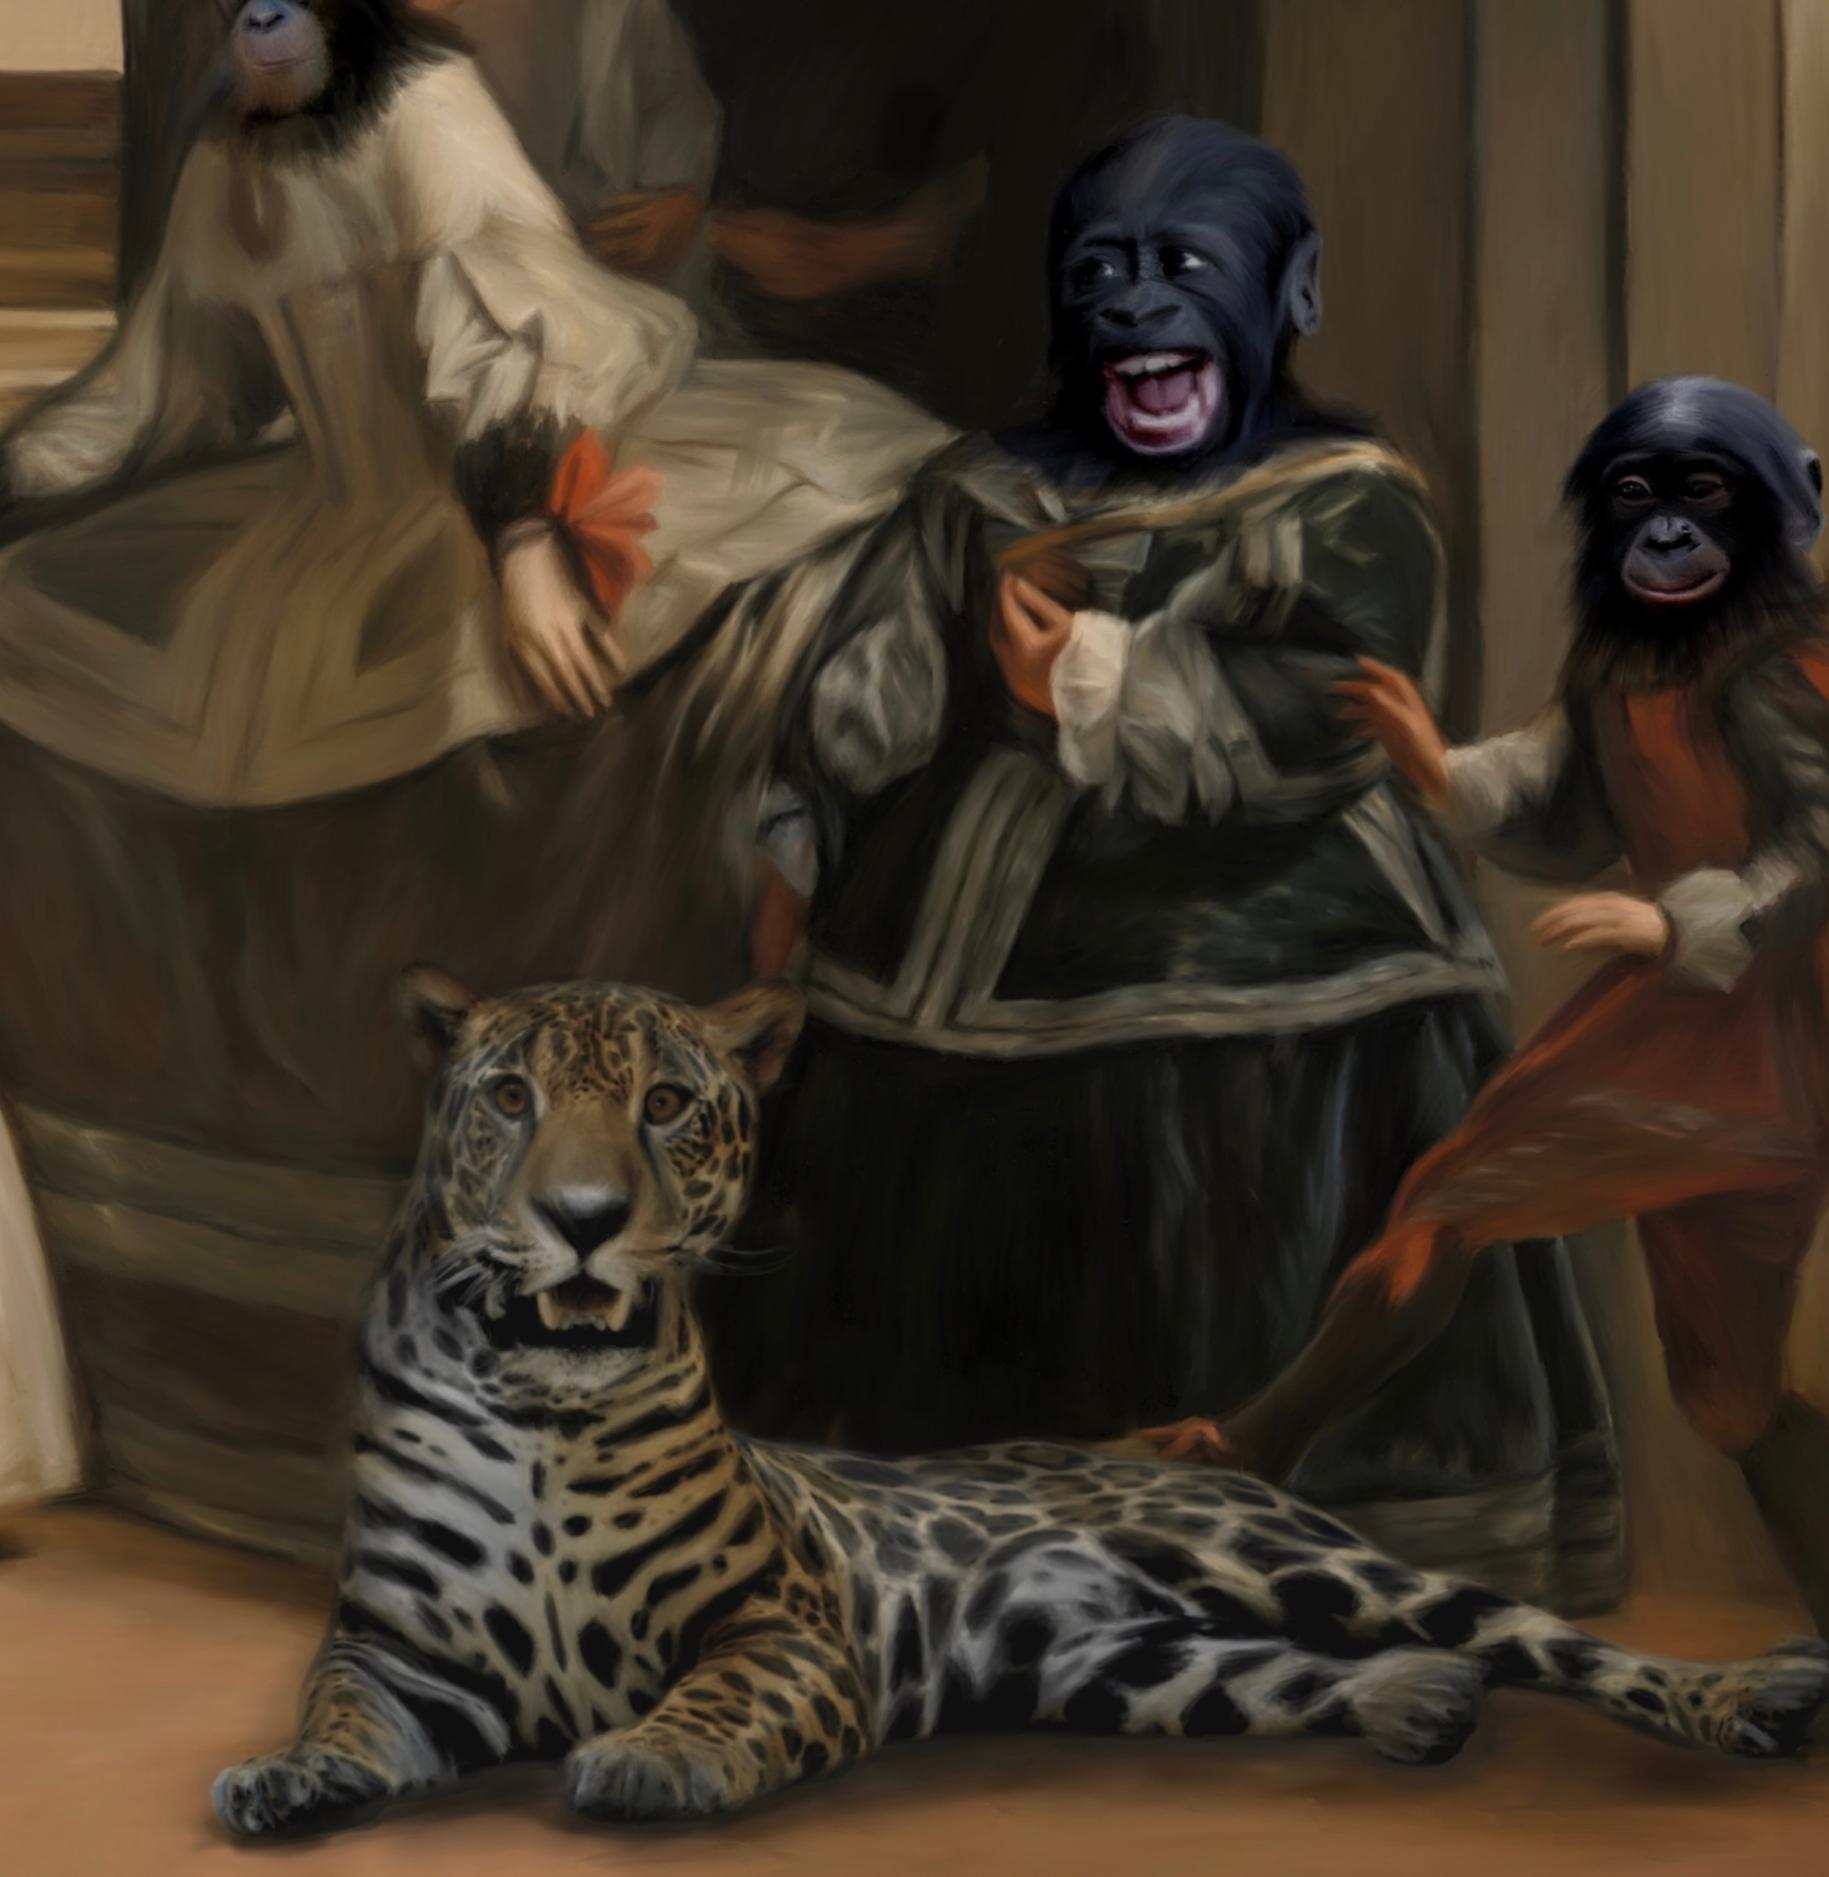 Moninas. Comical palace scene inspired by Las Meninas, Velazquez's masterpiece.

Fine Art Giclée Pigmented Inkjet. Digital painting printed on museum quality canvas. Edition of 10.
Dimensions in centimetres 100 x 110 x 3 cm
In inches  43.31 x 39.37